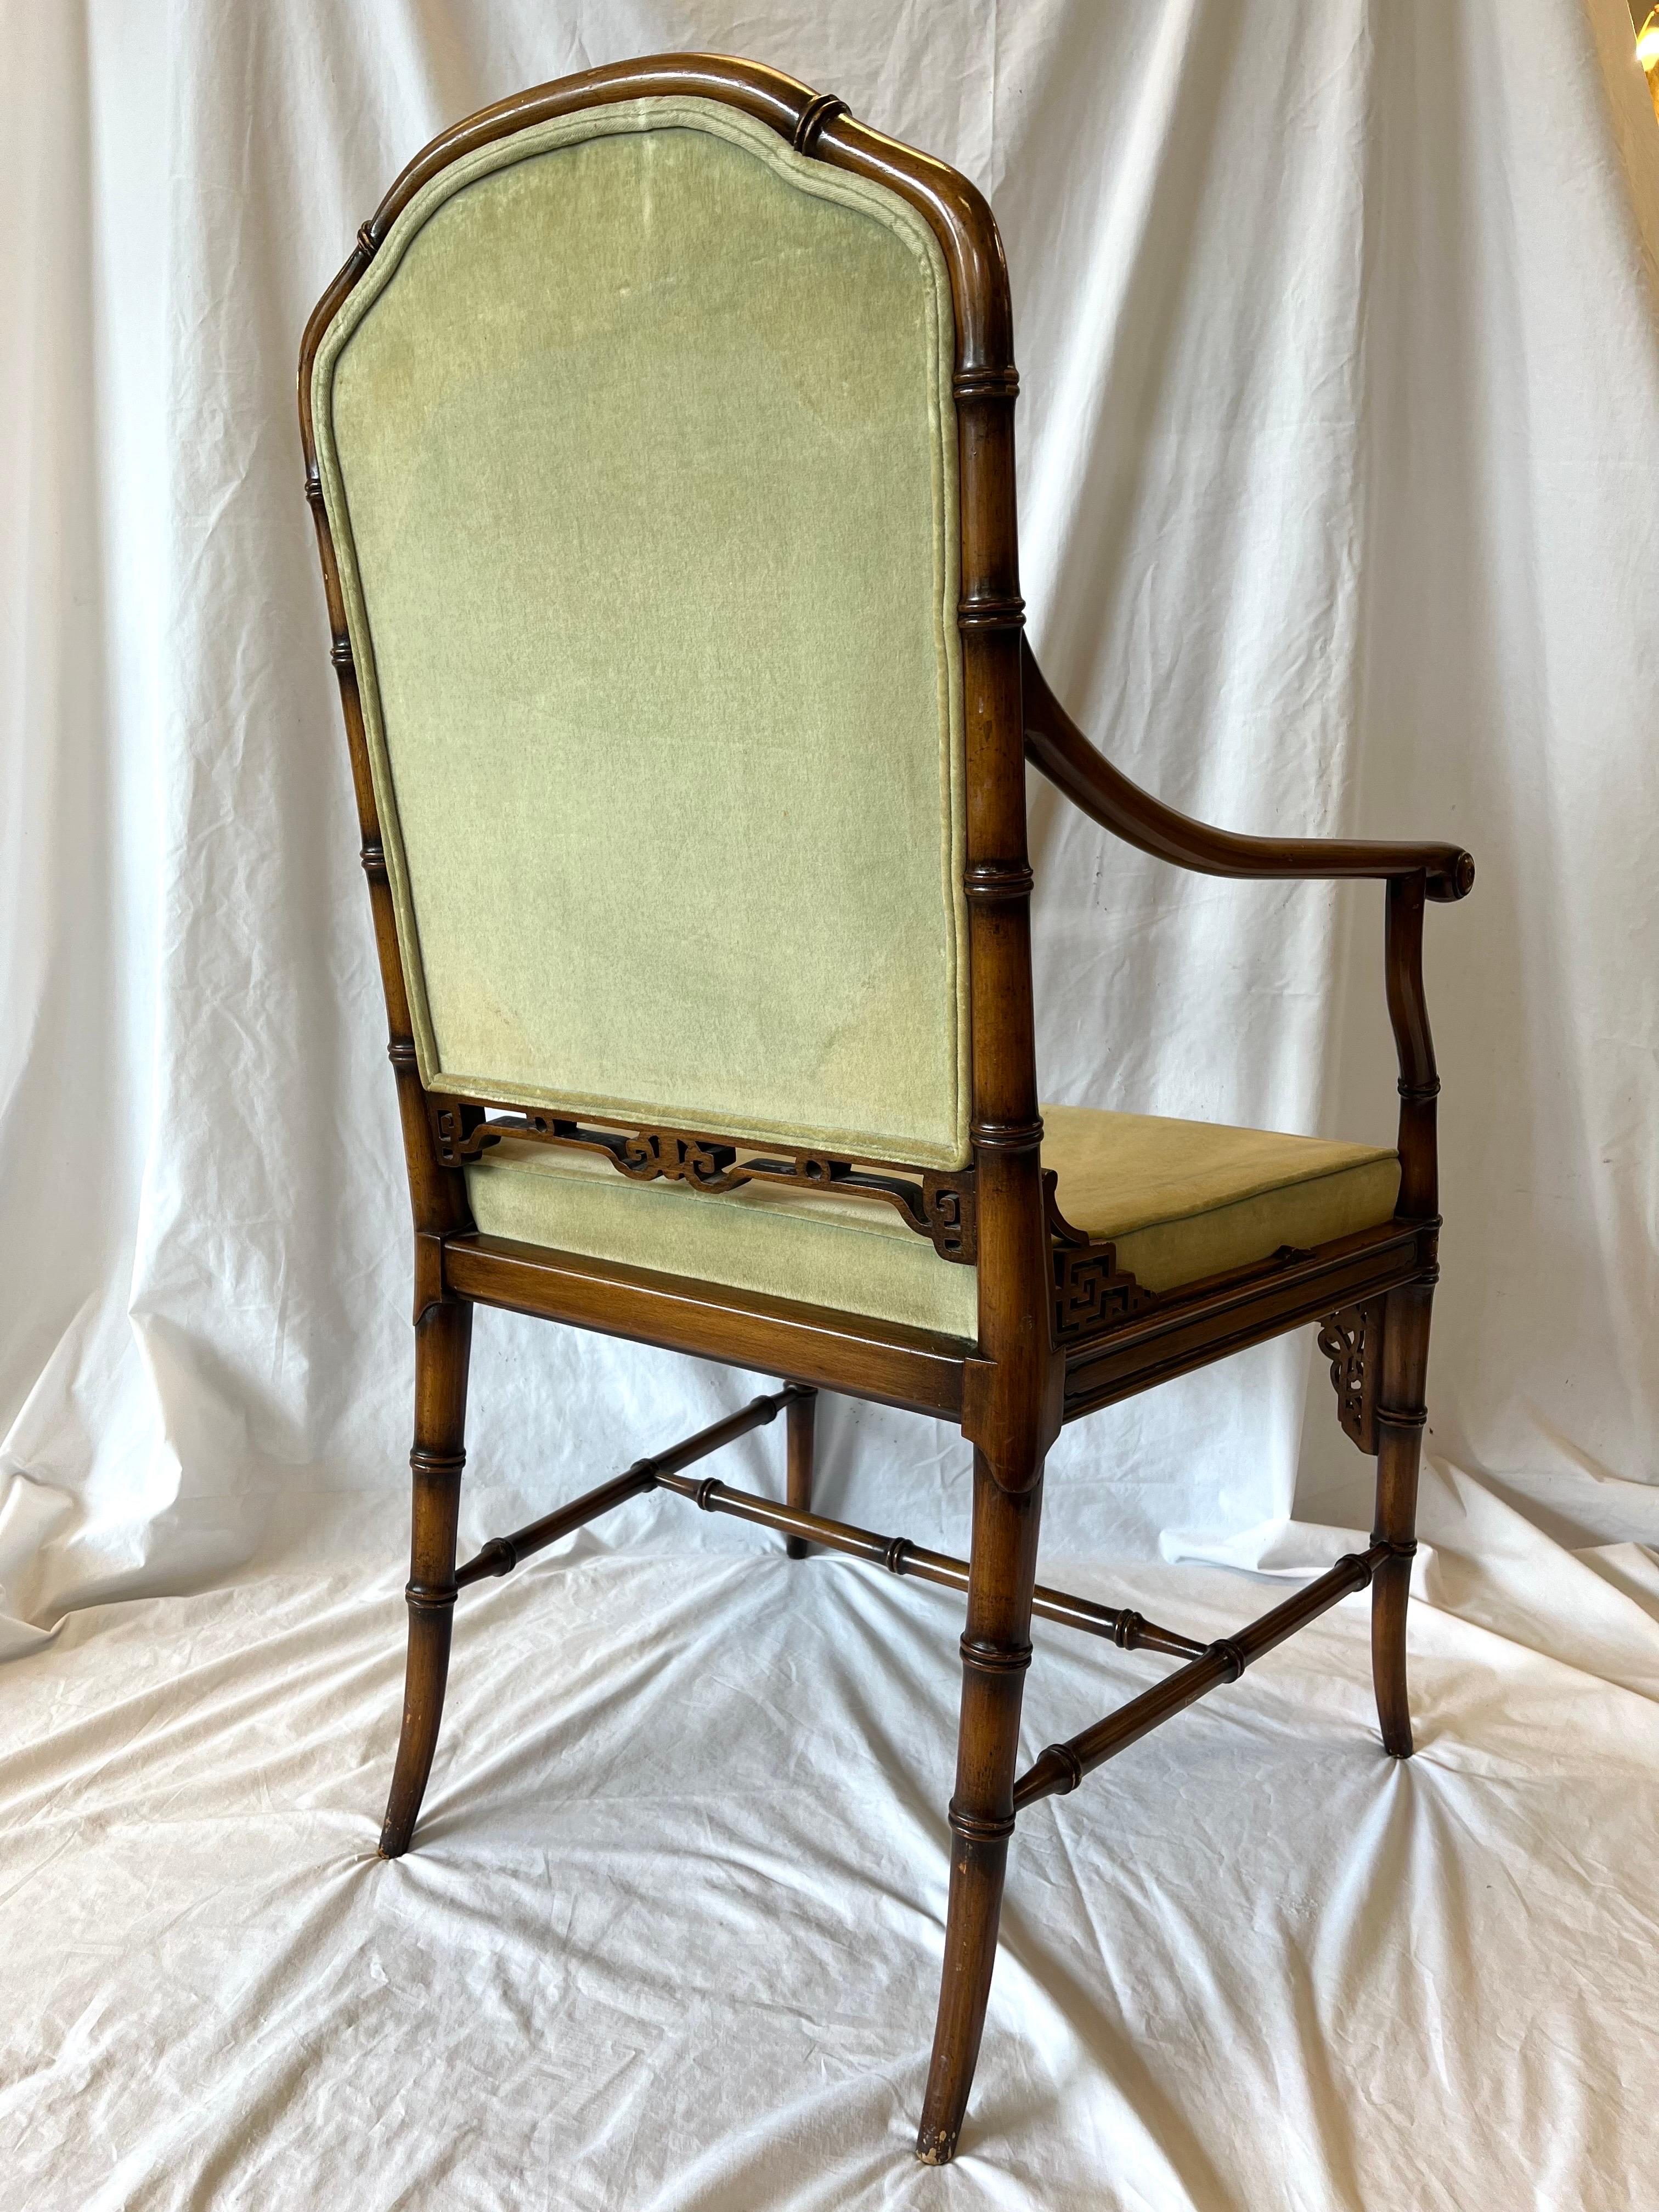 Vintage Faux Bamboo Chinoiserie Style Upholstered Fretwork Armchair Desk Chair 5